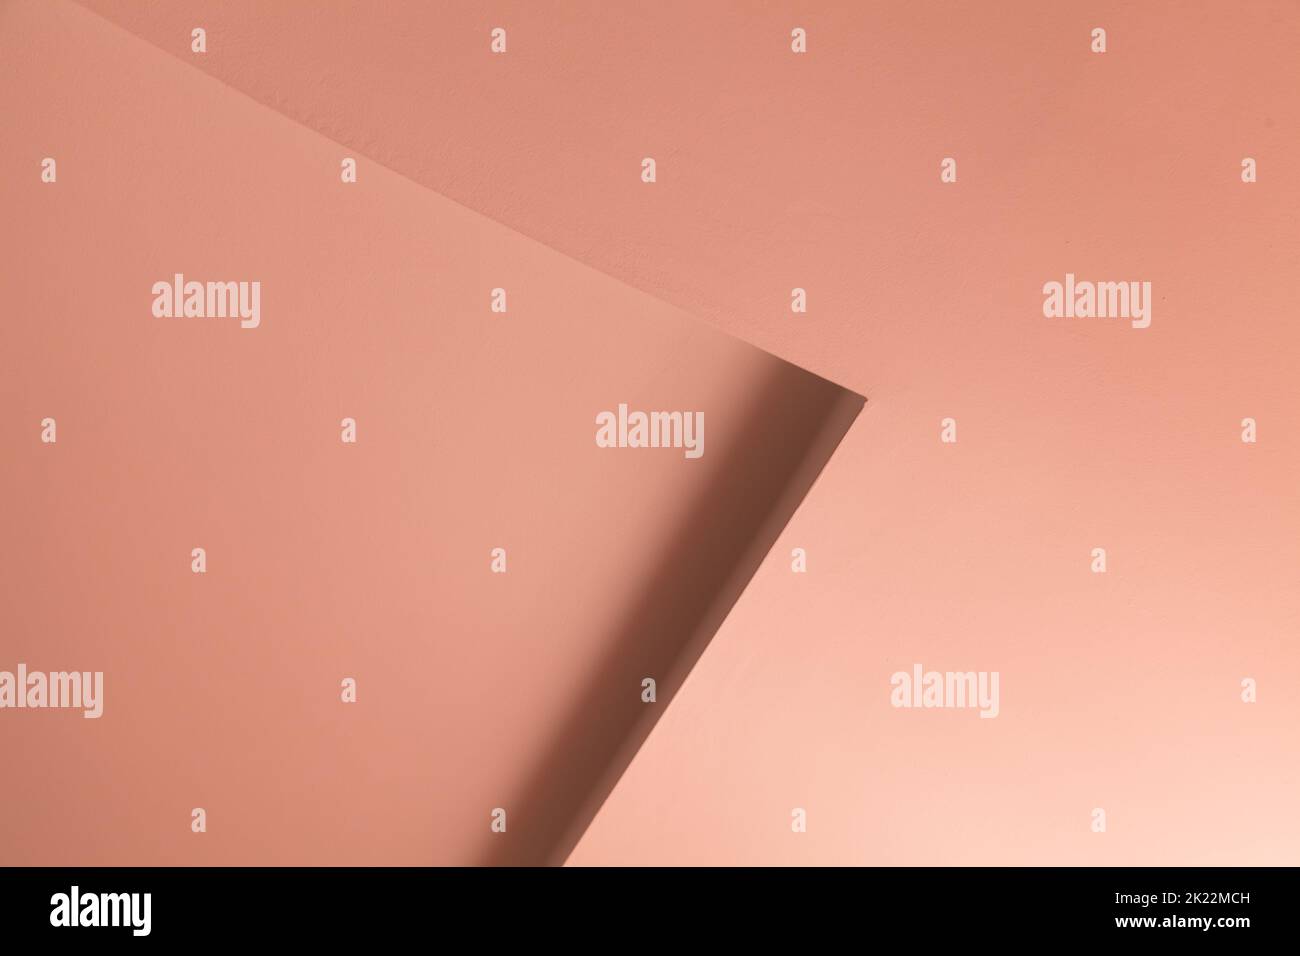 Abstract architecture background, pink interior fragment with a niche corner in the wall Stock Photo